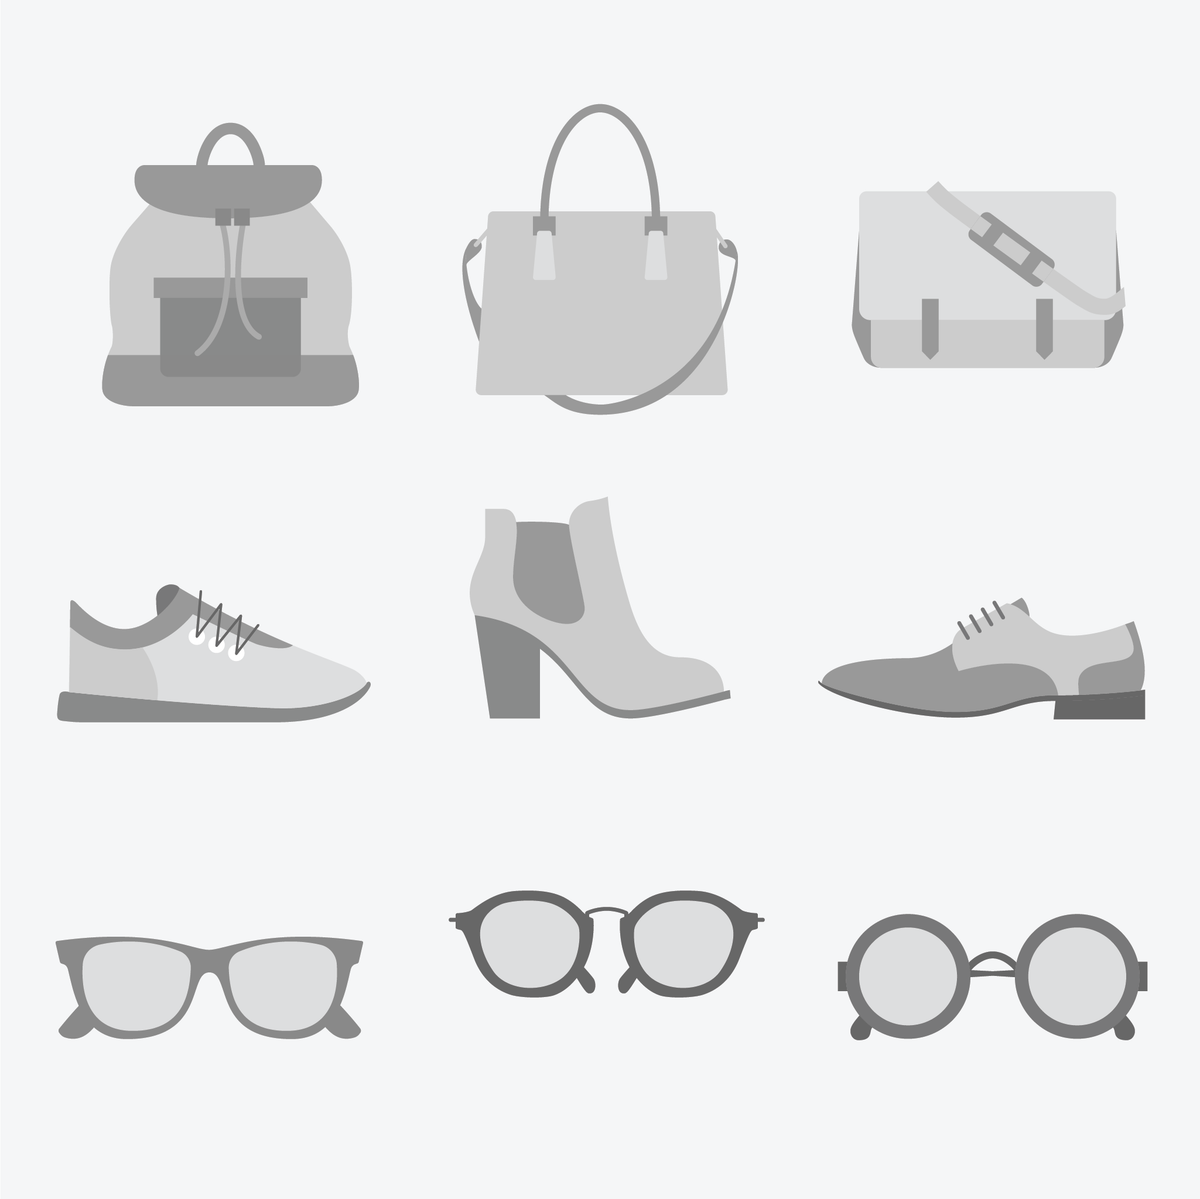 Greyscale vector images for eyeglasses, shoes, and bags.